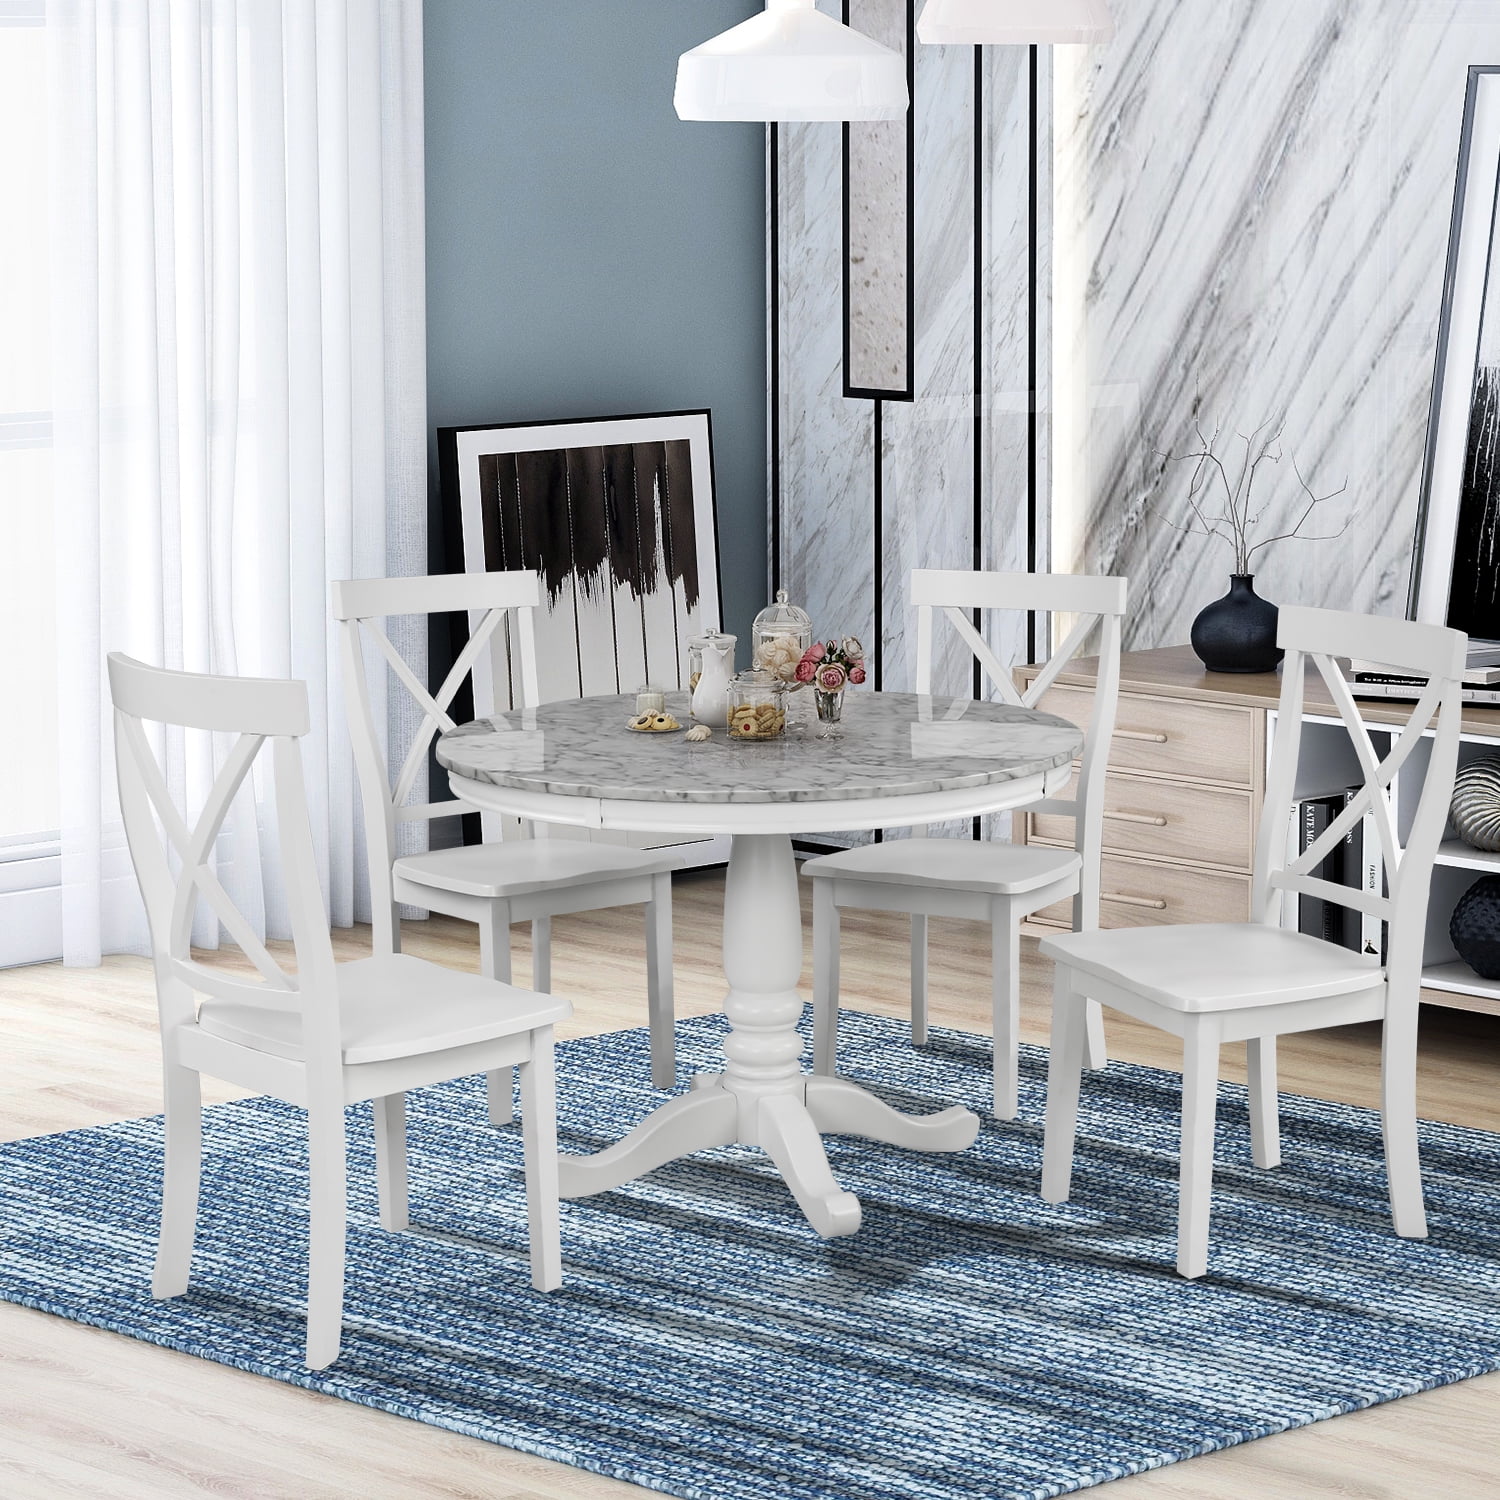 Dining Table Chairs Set For 4, White Circle Dining Table And Chairs